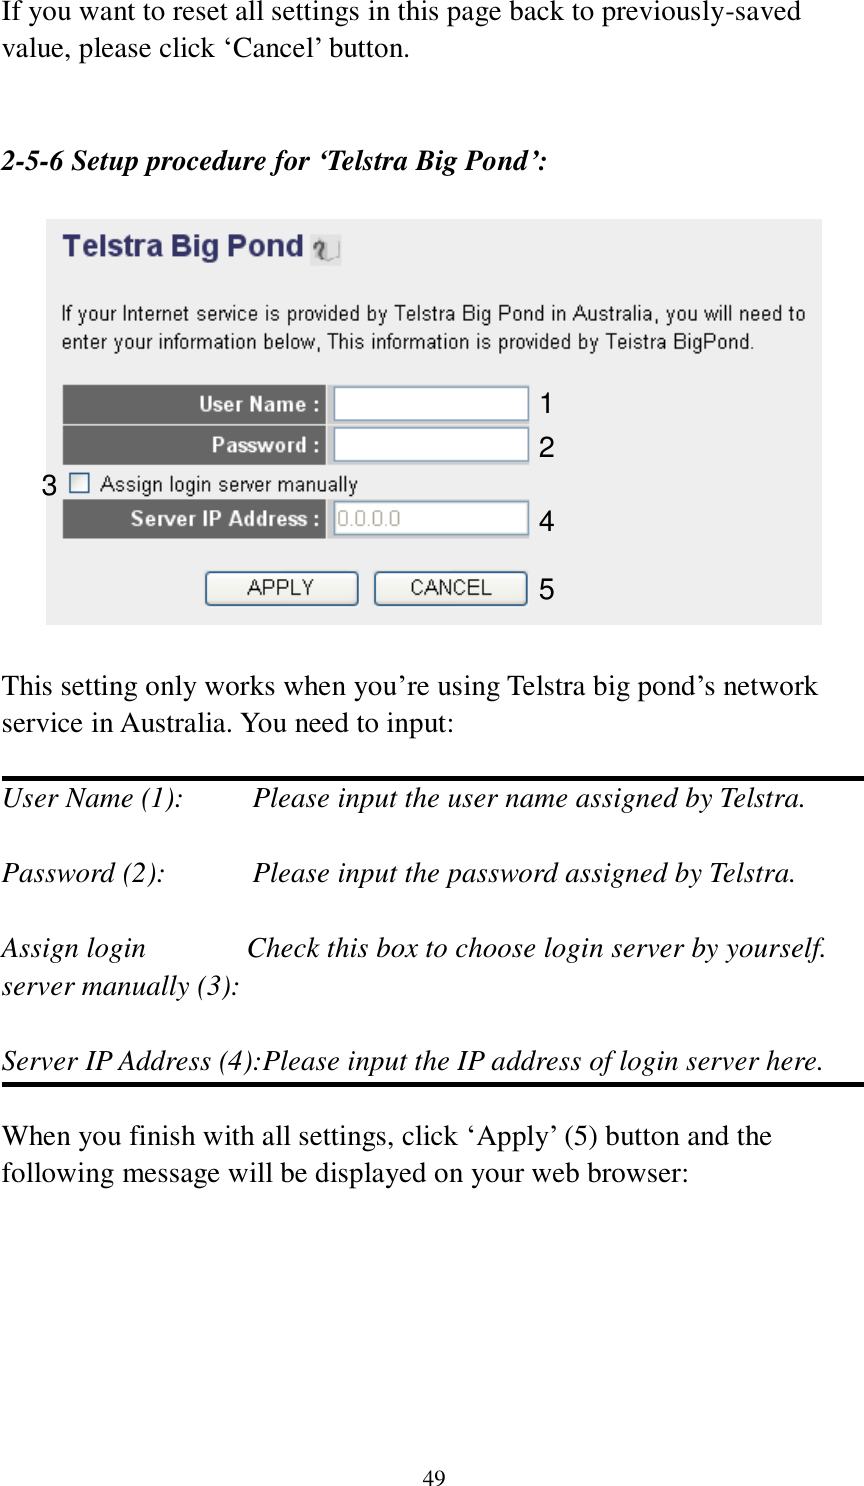 49 If you want to reset all settings in this page back to previously-saved value, please click „Cancel‟ button.   2-5-6 Setup procedure for ‘Telstra Big Pond’:    This setting only works when you‟re using Telstra big pond‟s network service in Australia. You need to input:  User Name (1):     Please input the user name assigned by Telstra.  Password (2):      Please input the password assigned by Telstra.  Assign login       Check this box to choose login server by yourself. server manually (3):    Server IP Address (4):Please input the IP address of login server here.  When you finish with all settings, click „Apply‟ (5) button and the following message will be displayed on your web browser:  1 2 3 4 5 